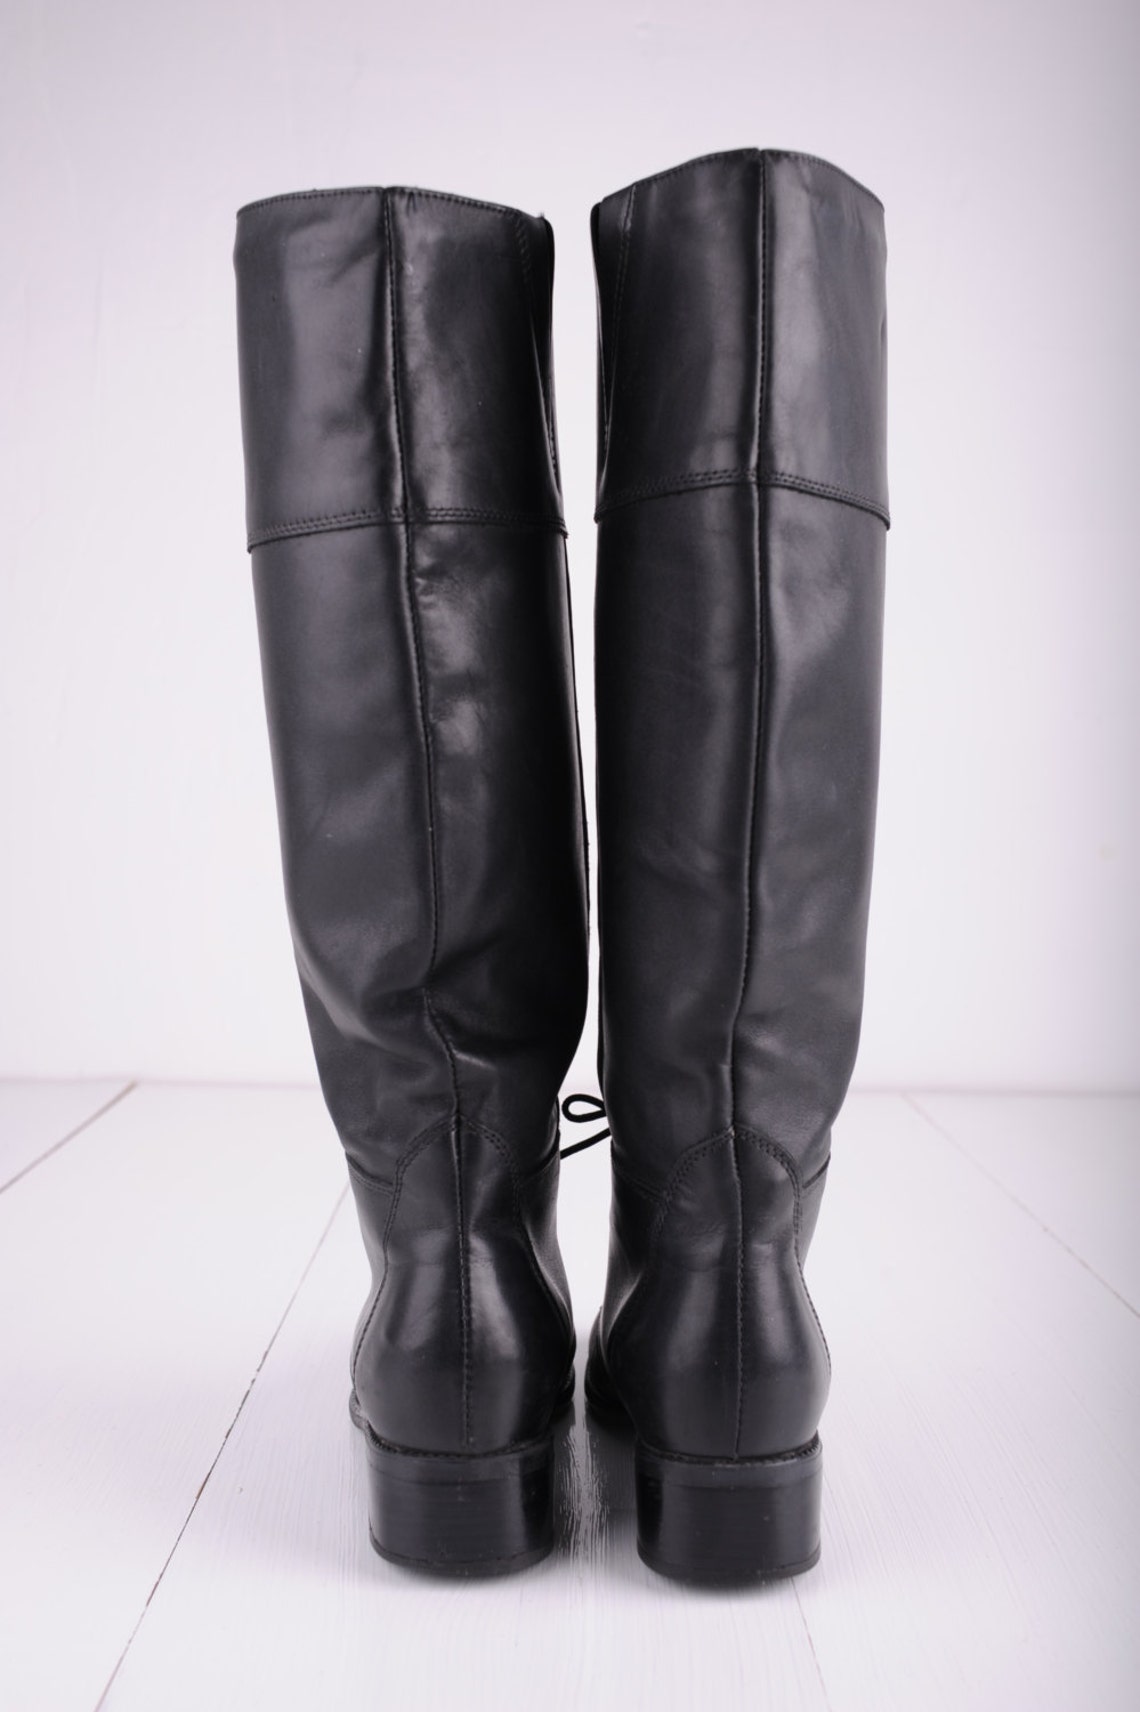 Vintage Blondo Black Leather Tall Riding Boots Made in - Etsy